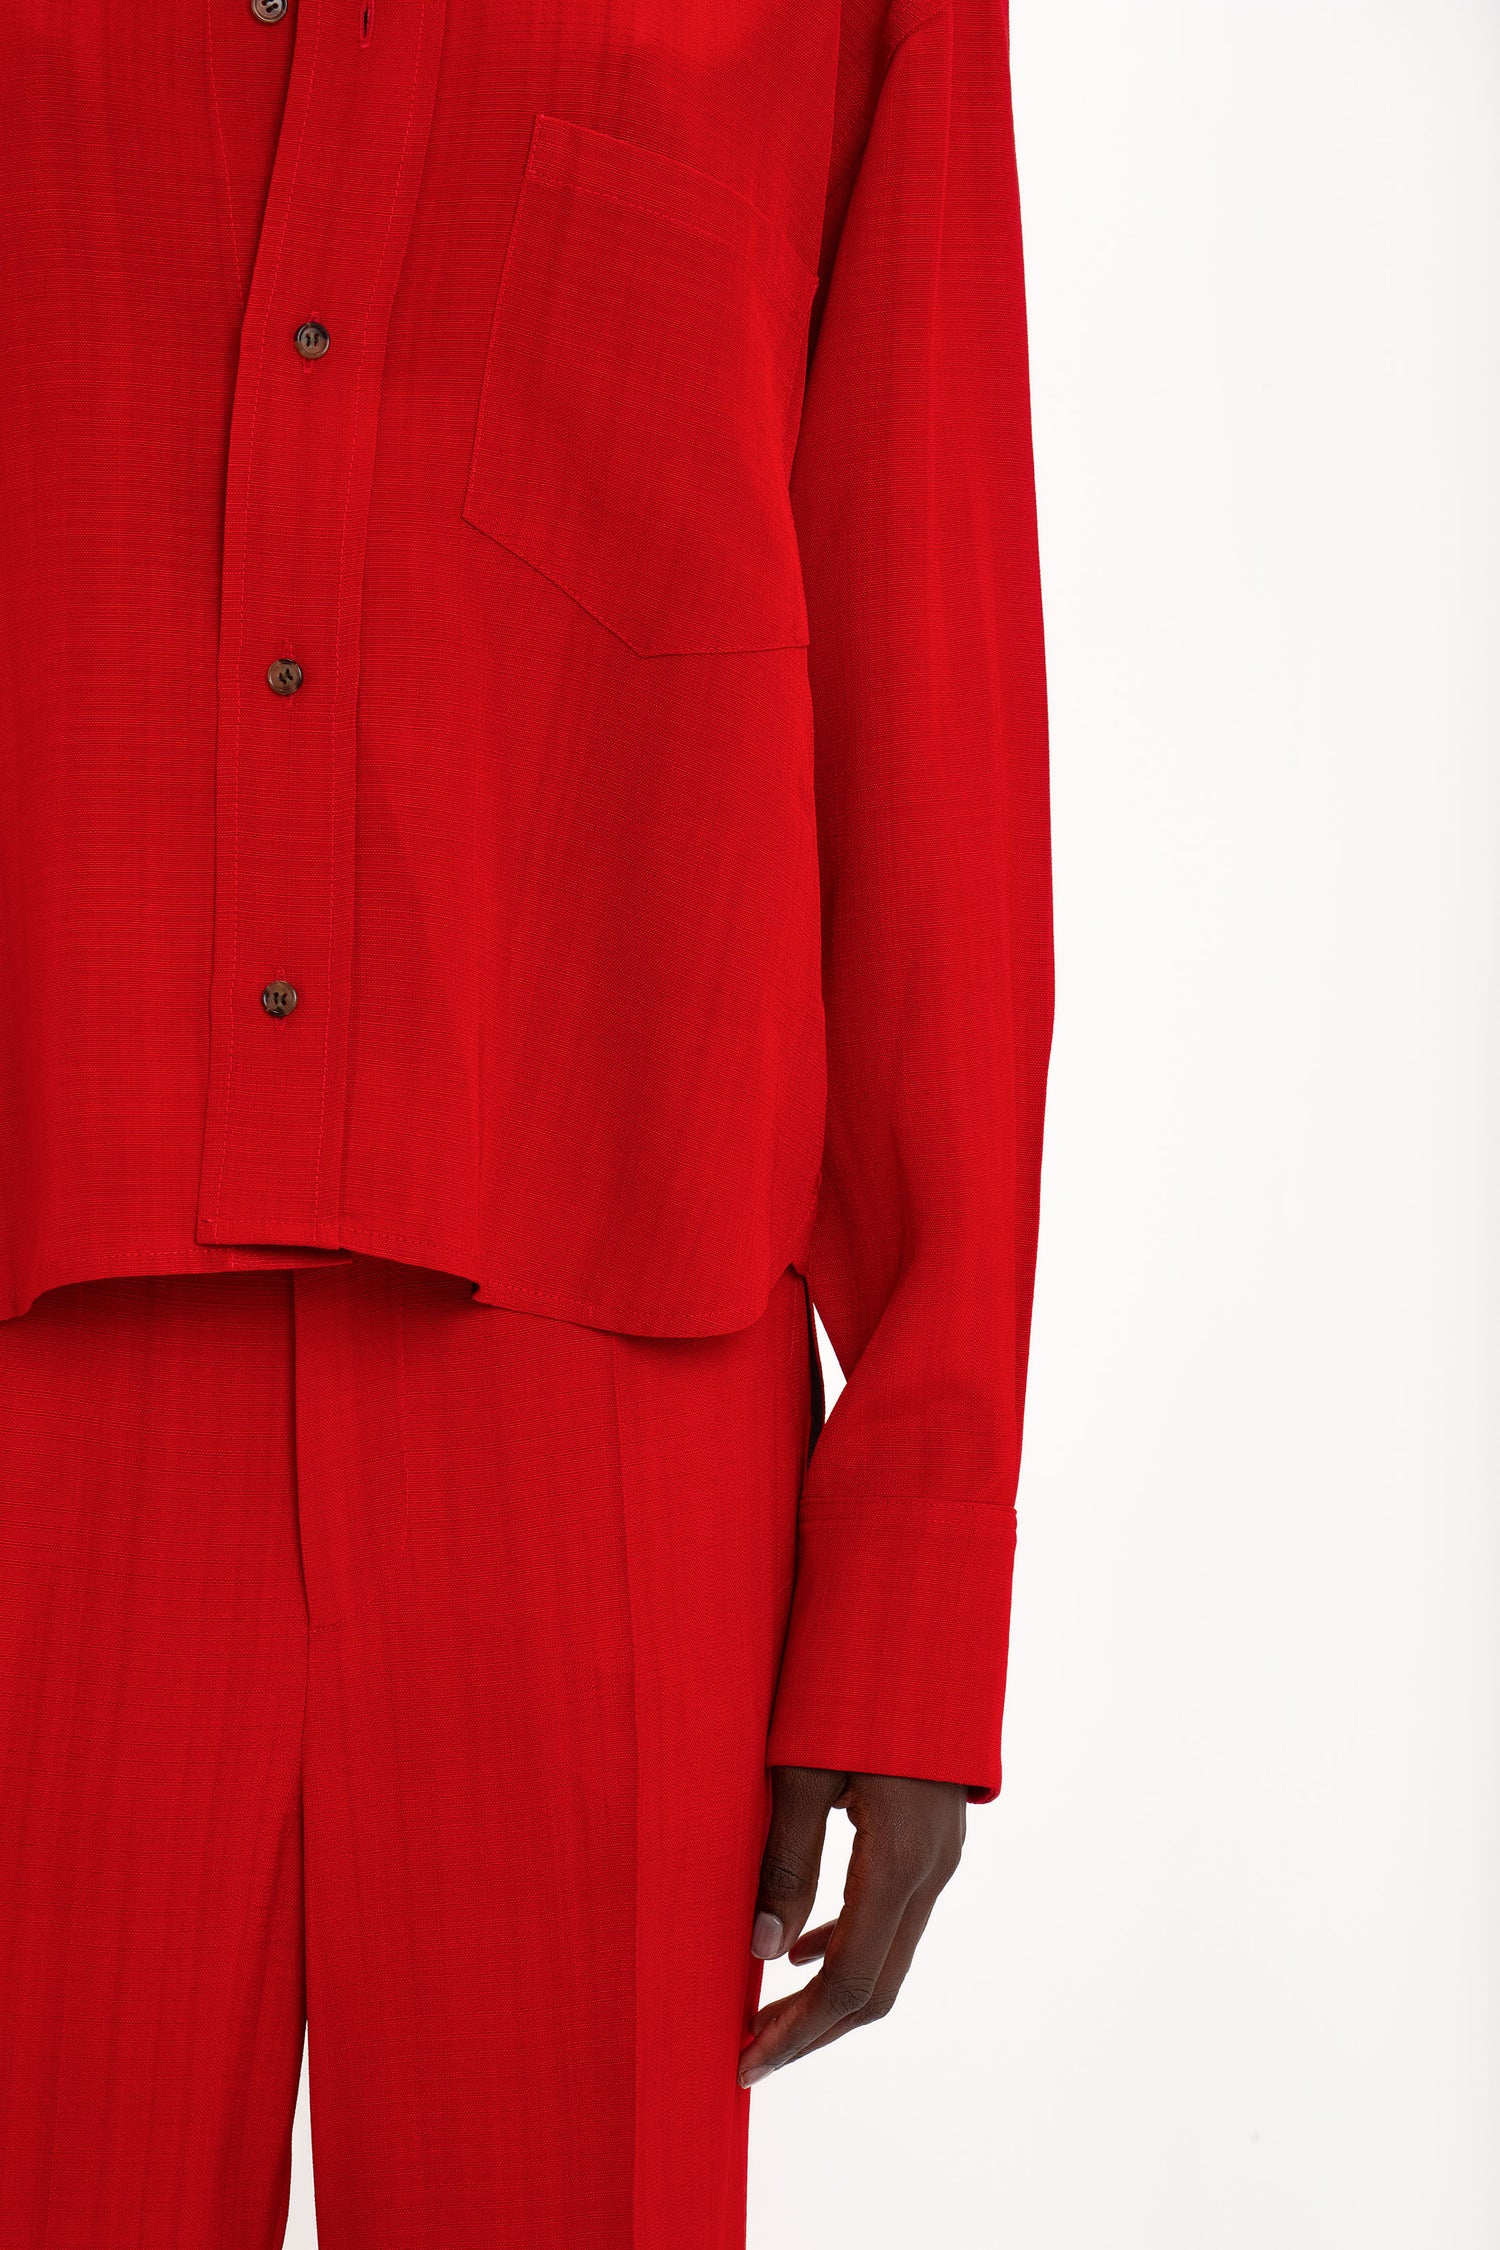 A person wearing a red masculine-inspired button-up Cropped Long Sleeve Shirt In Carmine by Victoria Beckham with a front pocket and matching red pants. The waist-defining cropped length adds a touch of elegance, while only the torso and upper legs are visible in the image.